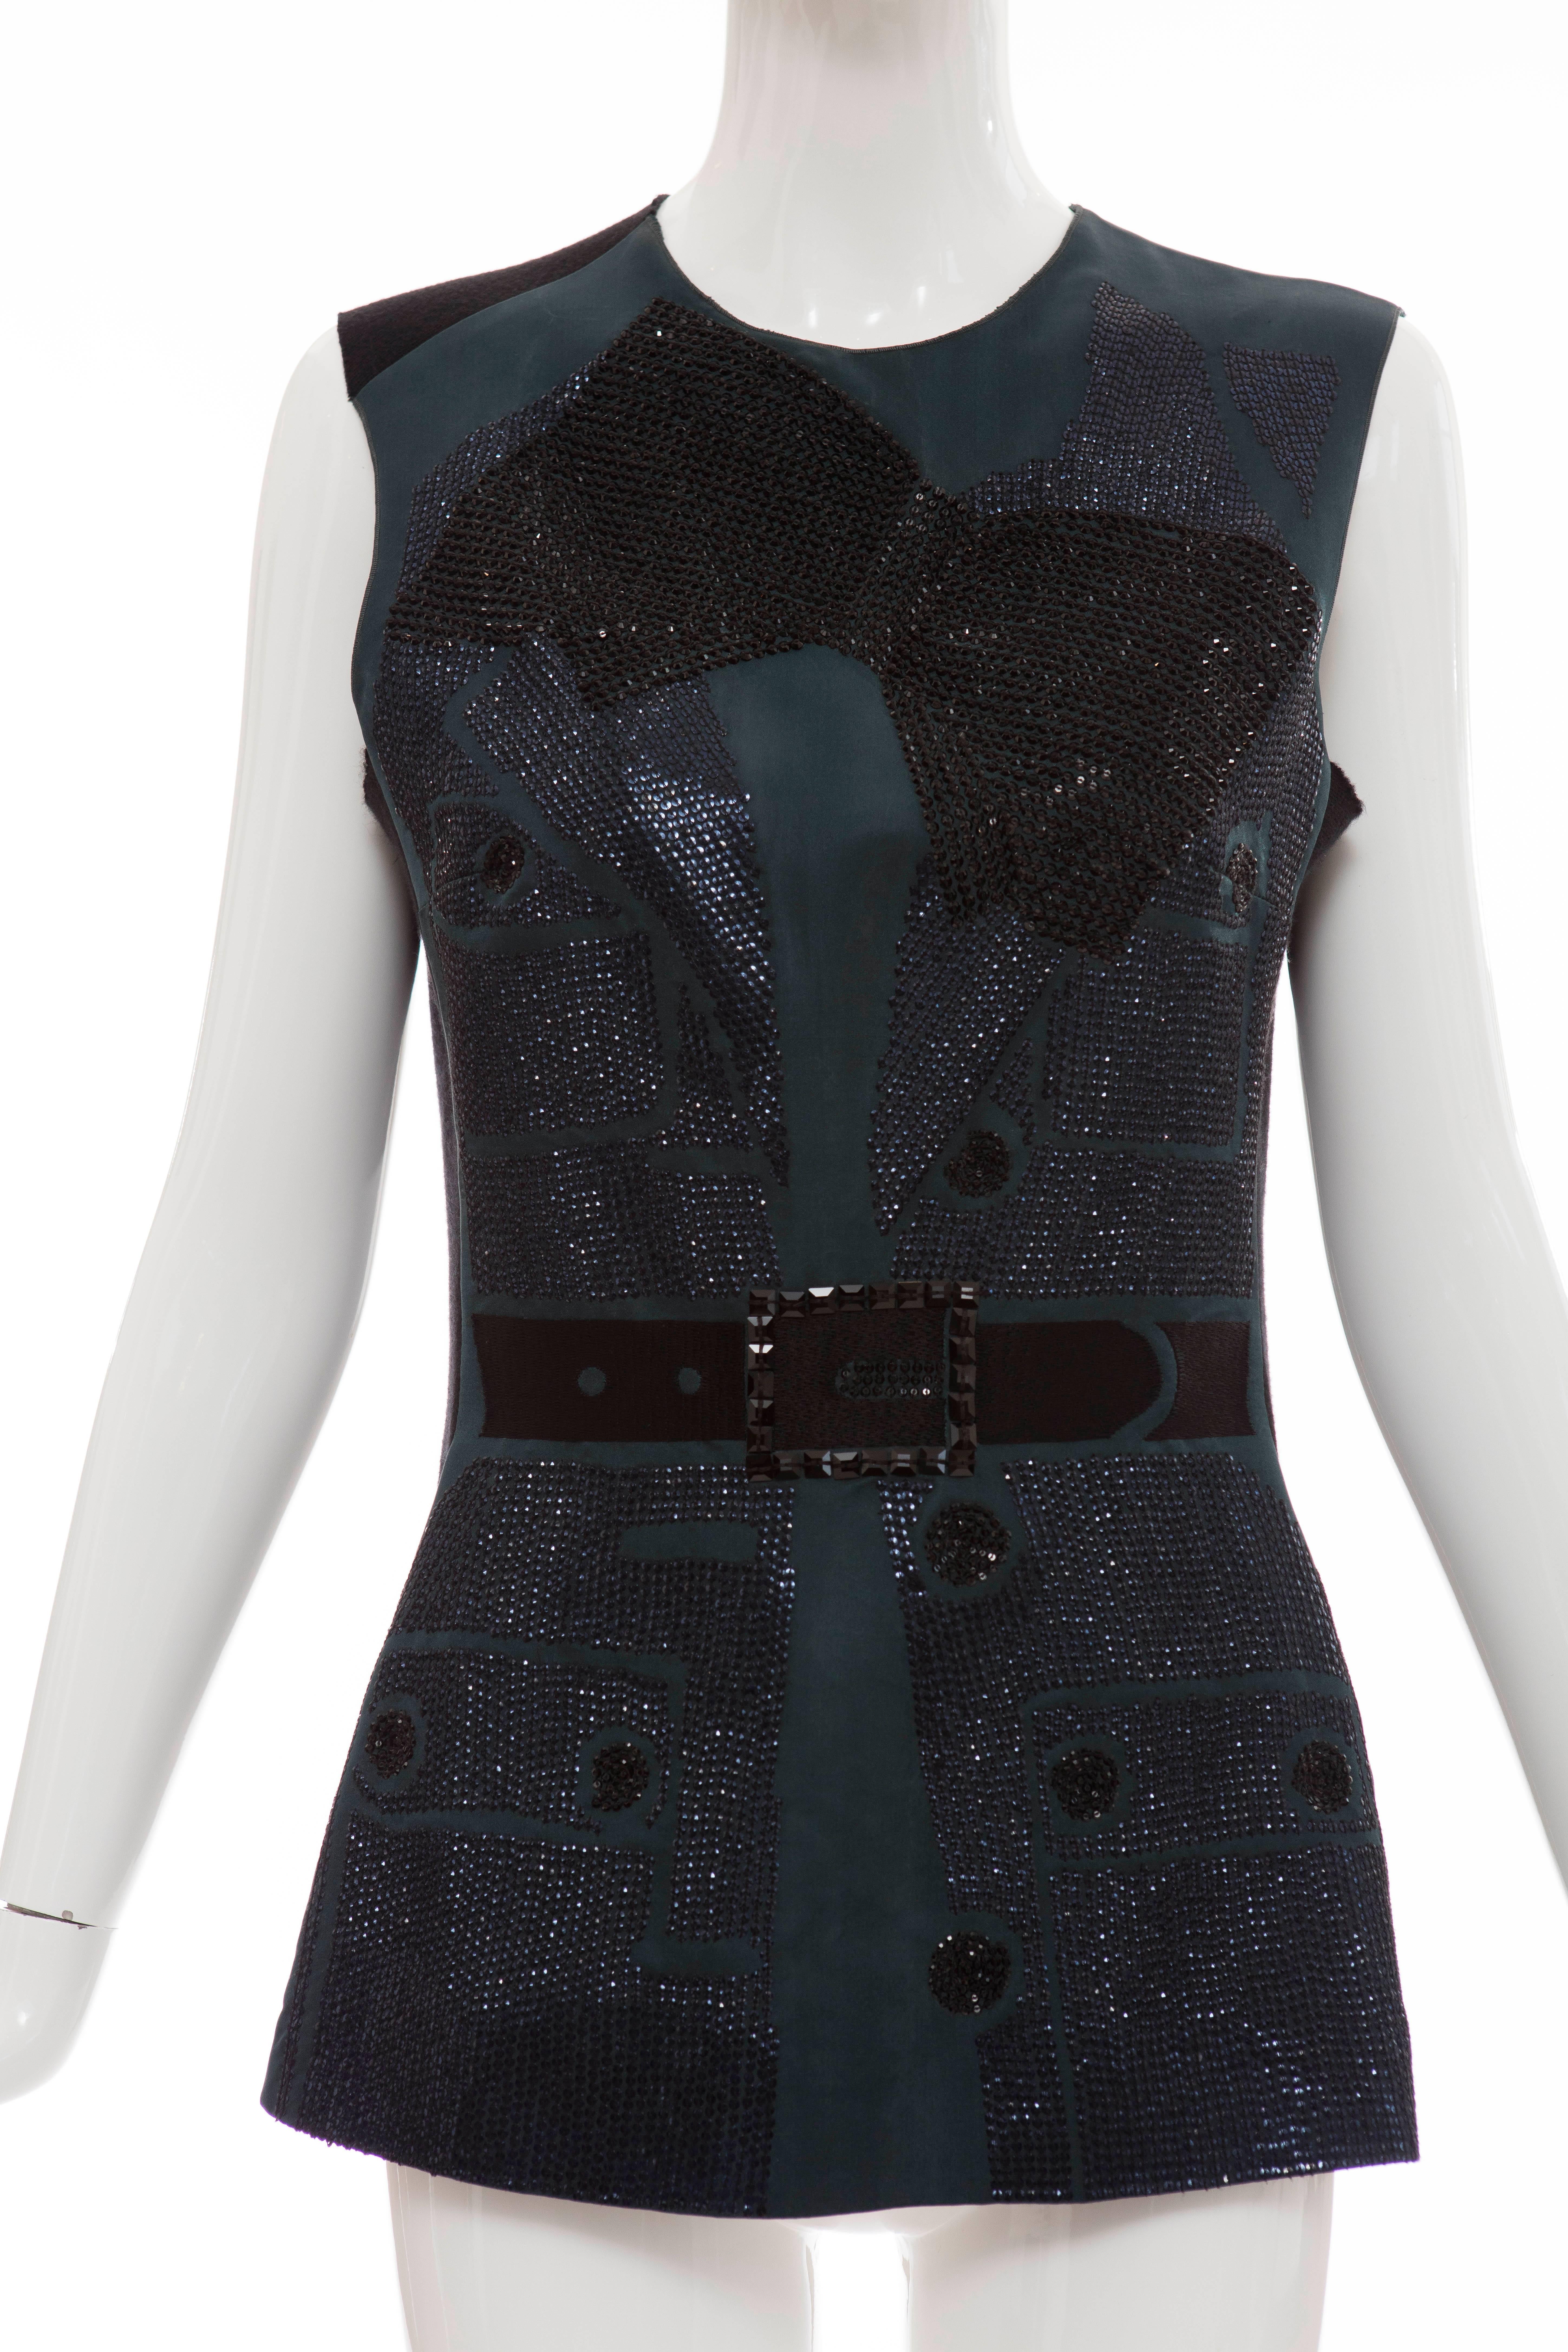 Lanvin by Alber Elbaz, circa 2006, sleeveless top with silk front panel, wool back panel, crystal and sequin embellishments and back button closure.